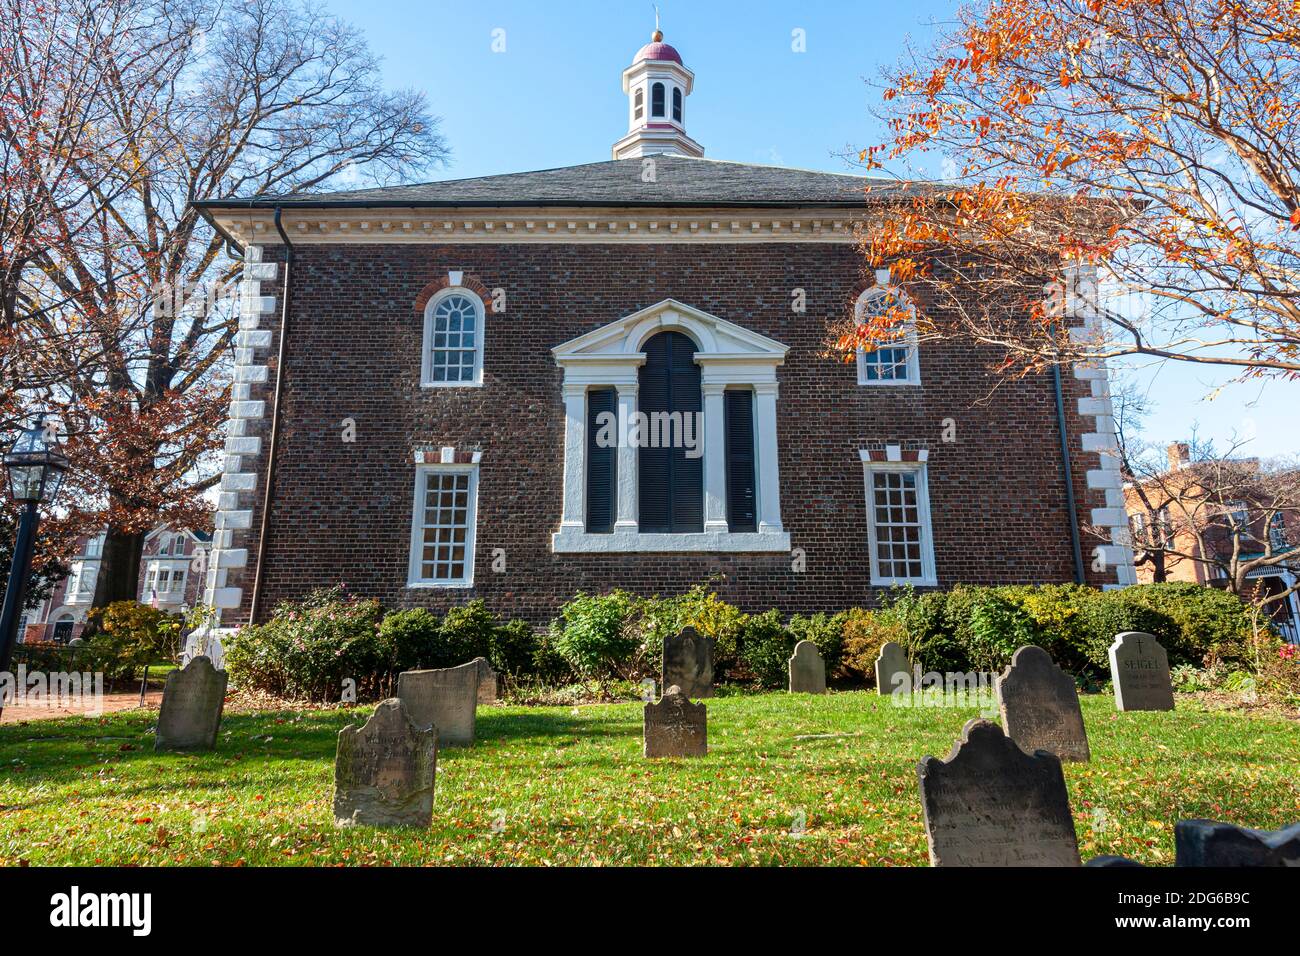 Historic Christ Church of Alexandria, Virginia (built in 1773). This is a brick colonial era building with arched Palladian windows and an old cemeter Stock Photo